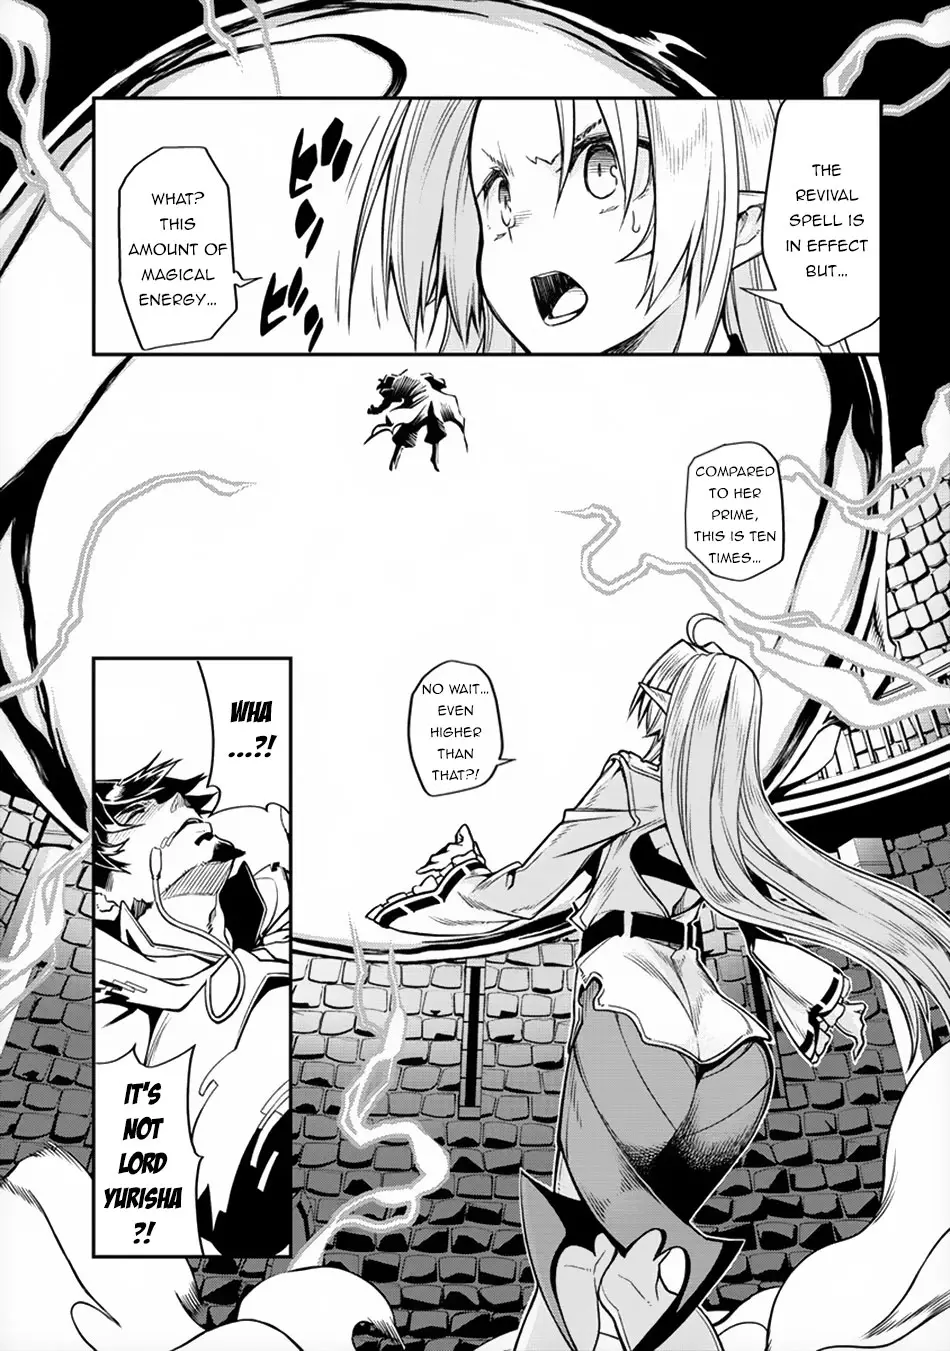 The Betrayed Hero Who Was Reincarnated As The Strongest Demon Lord - 1 page 20